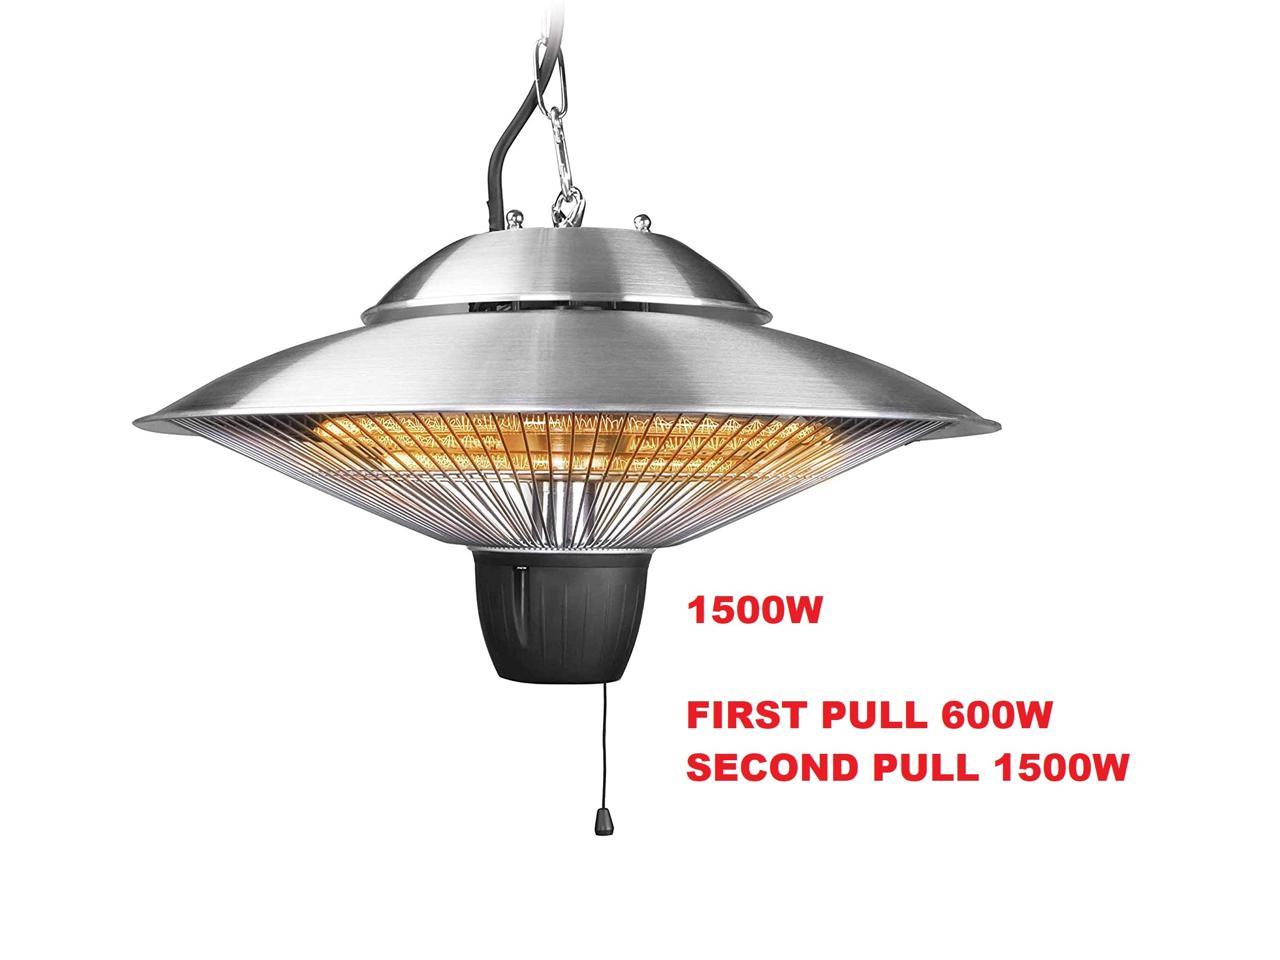 ZNERGY Infrared Electric Silver UFO Ceiling Hanging Heater with Dual Temperature Setting.